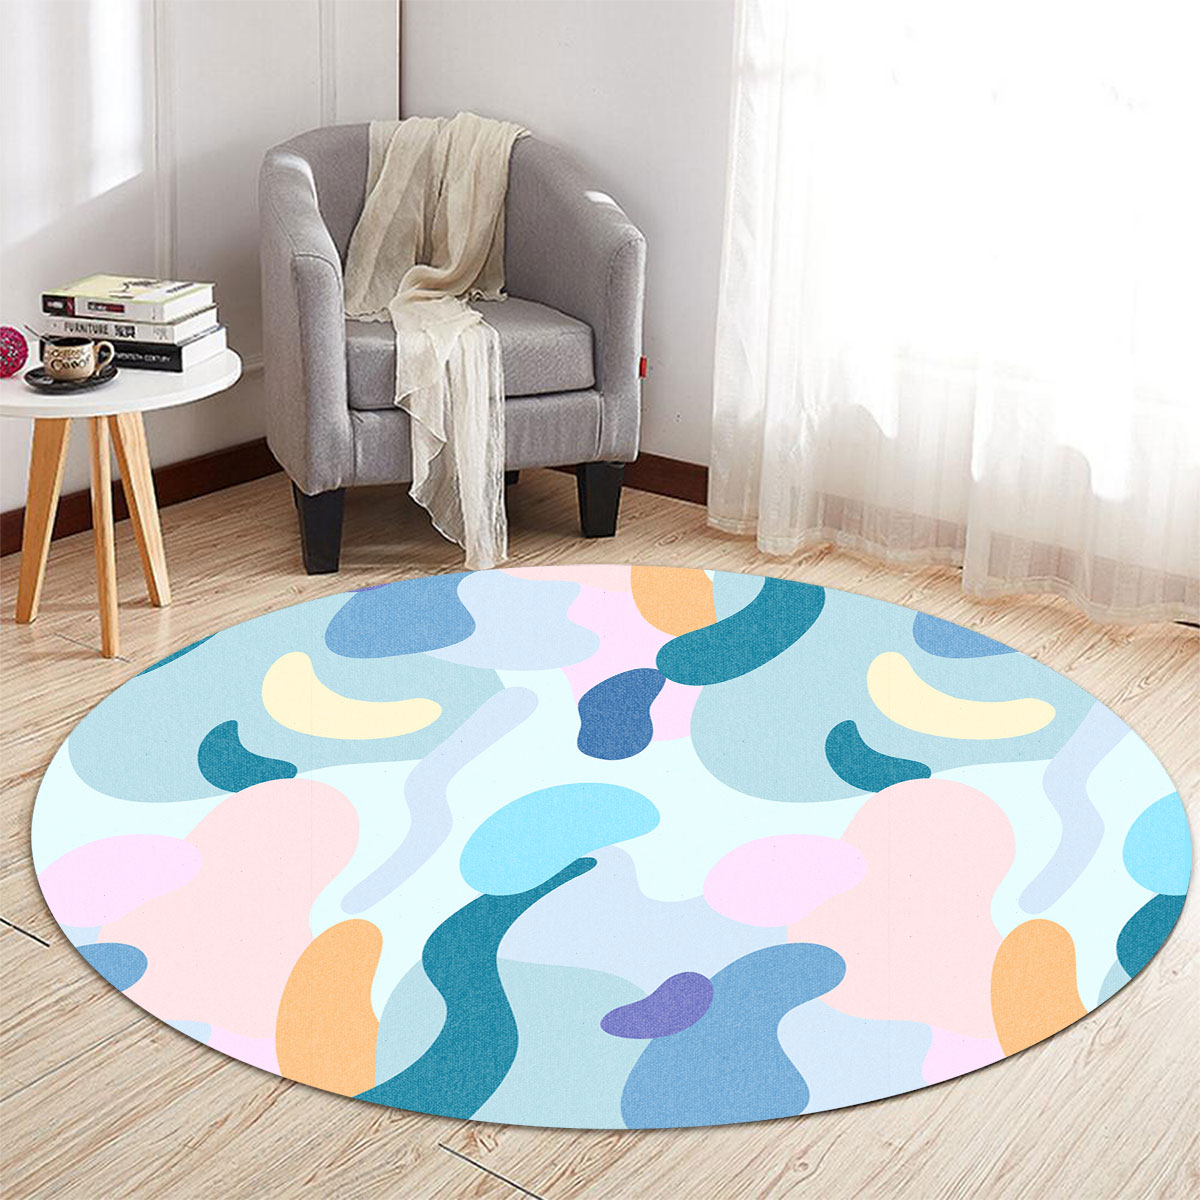 Colorful Abstract Minimalist Round Carpet